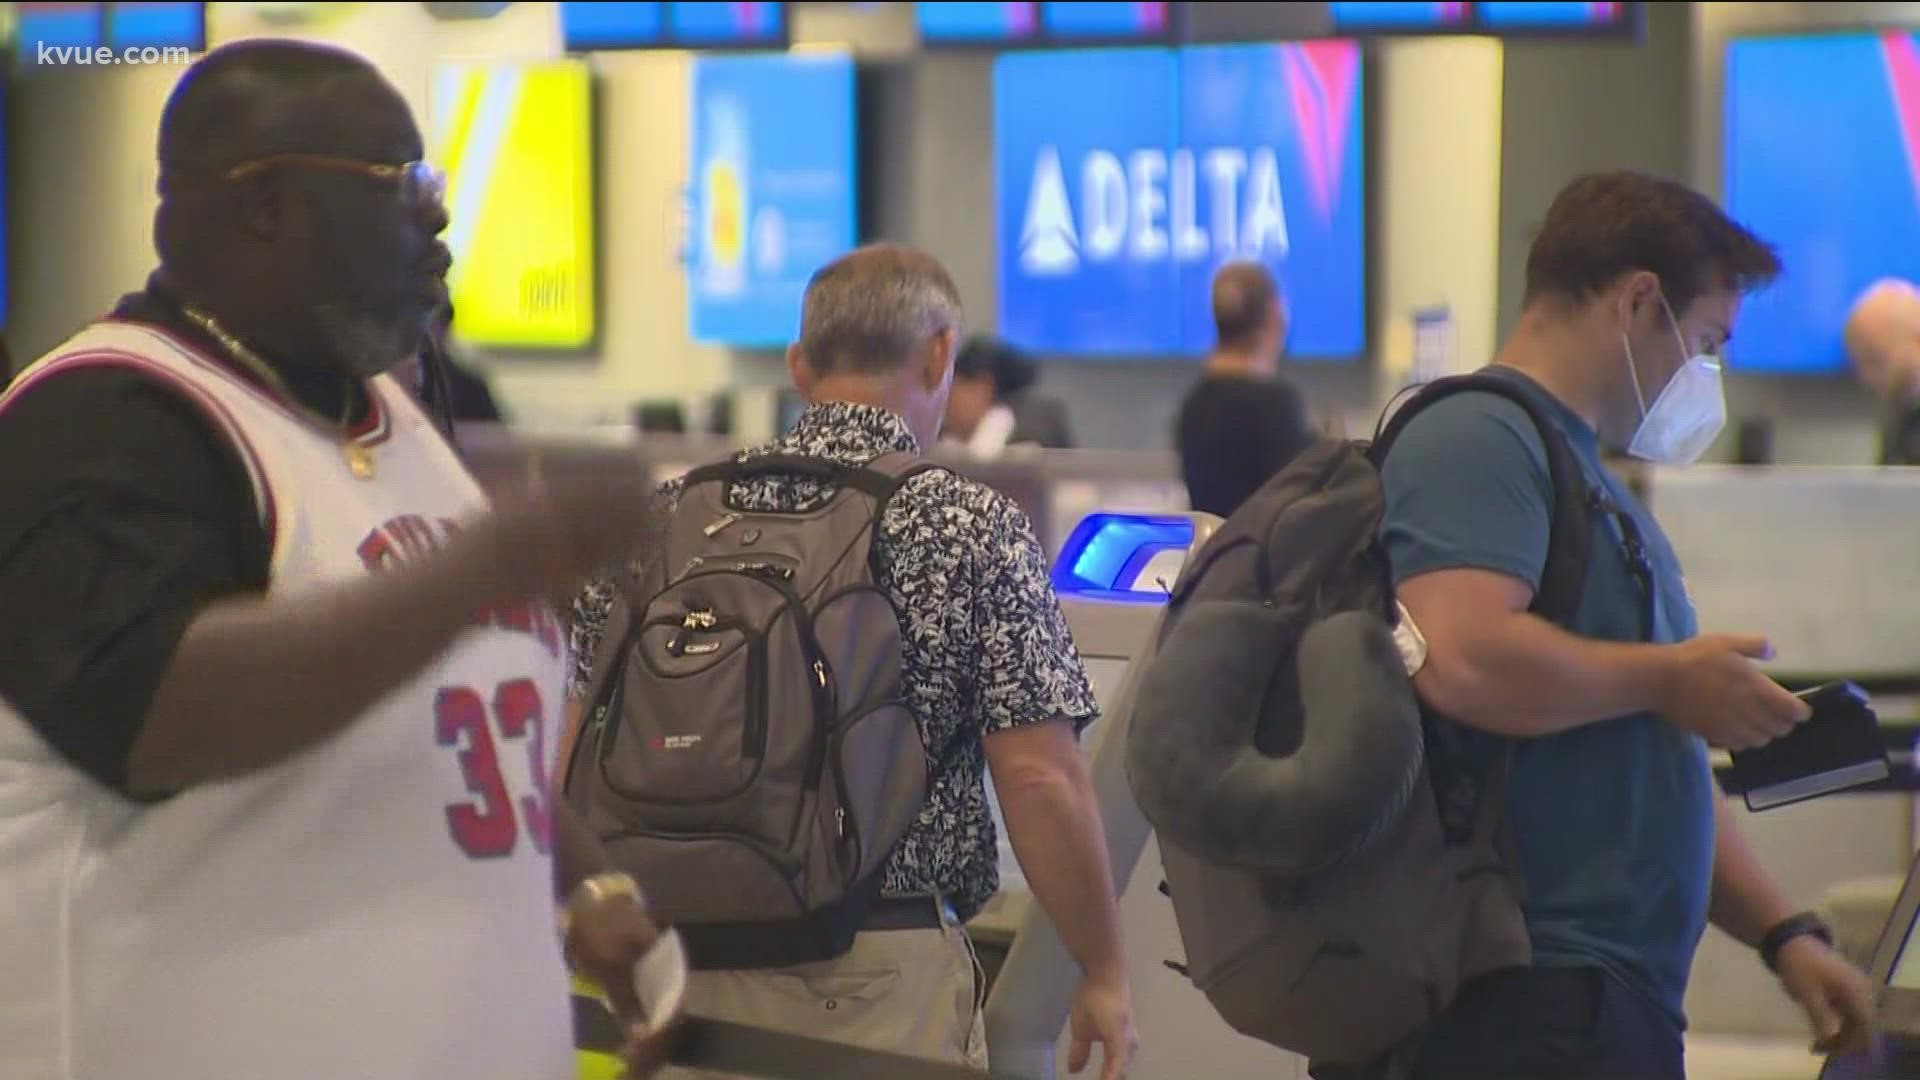 If you're catching the bus or taking a flight, wearing a mask is now optional. KVUE's Bryce Newberry has the details on how the mask mandate got overturned.